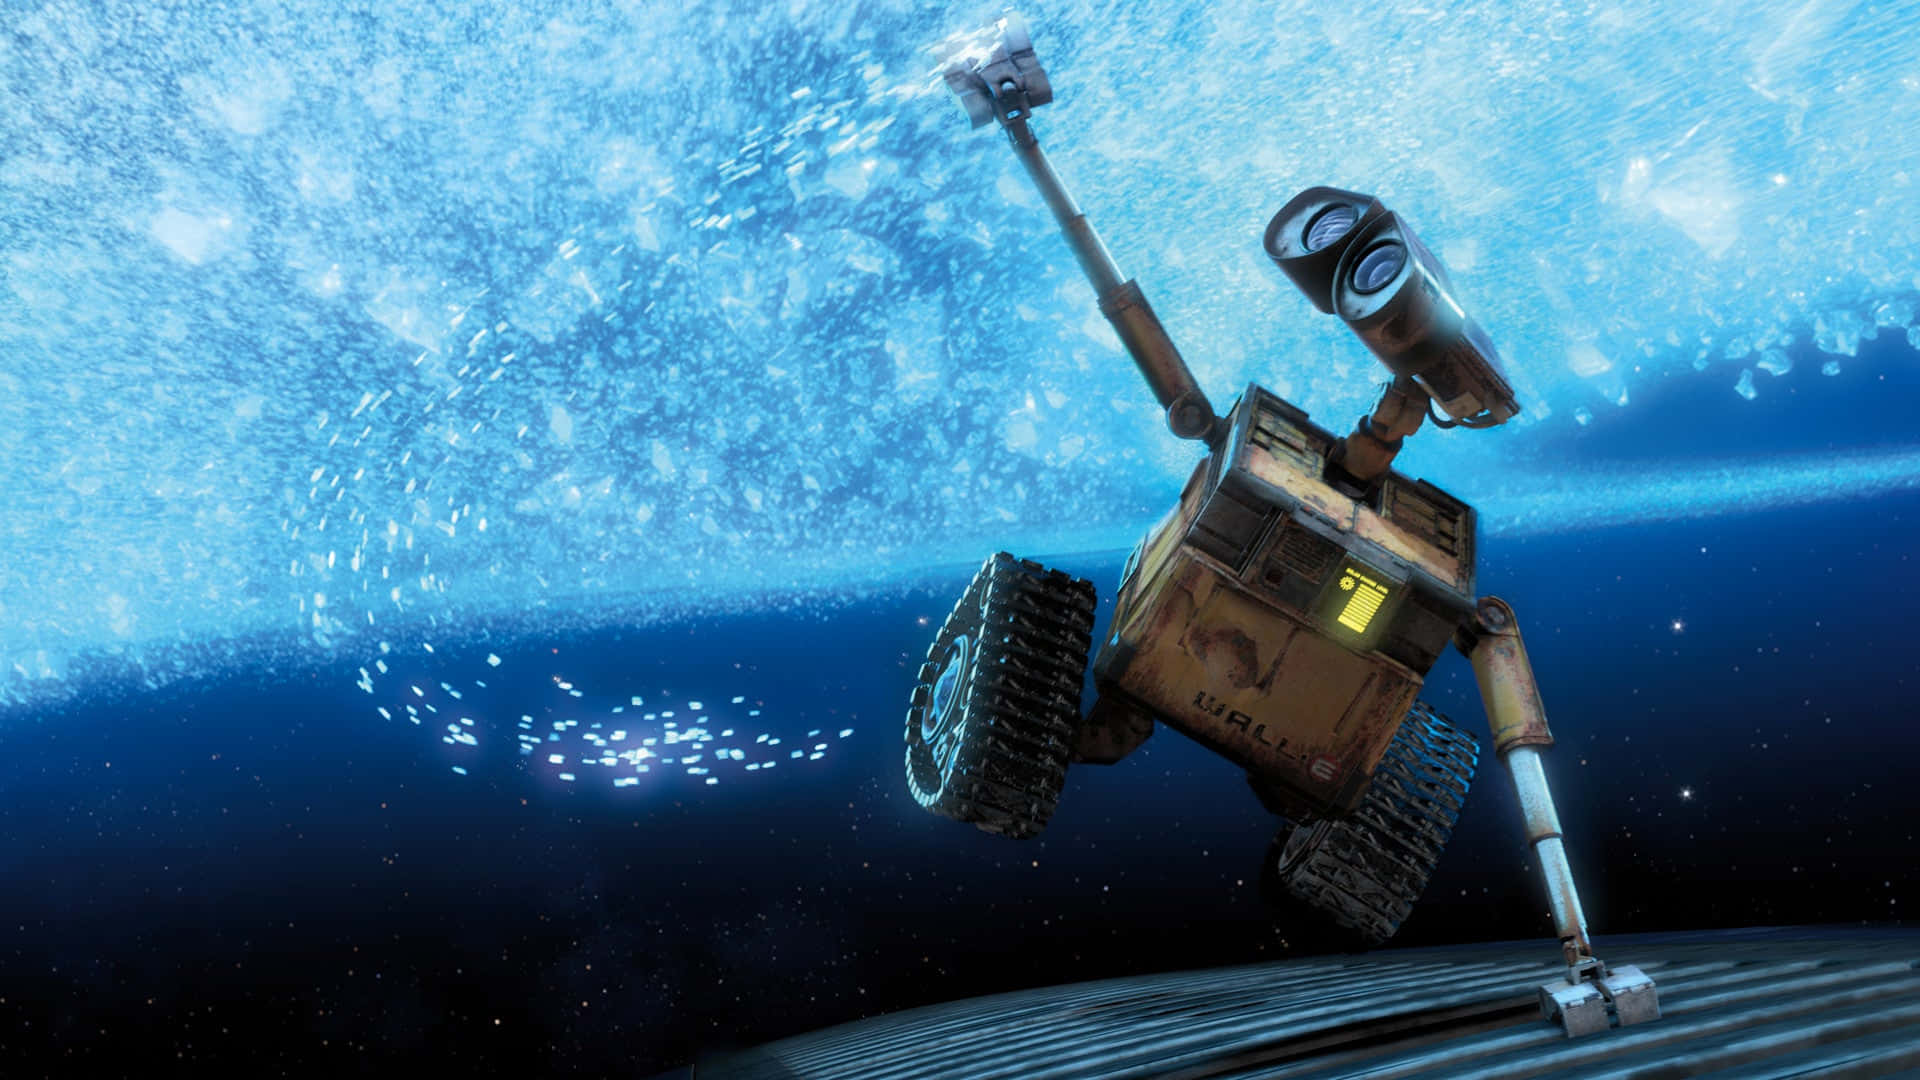 Space Robot Water Discovery Wallpaper